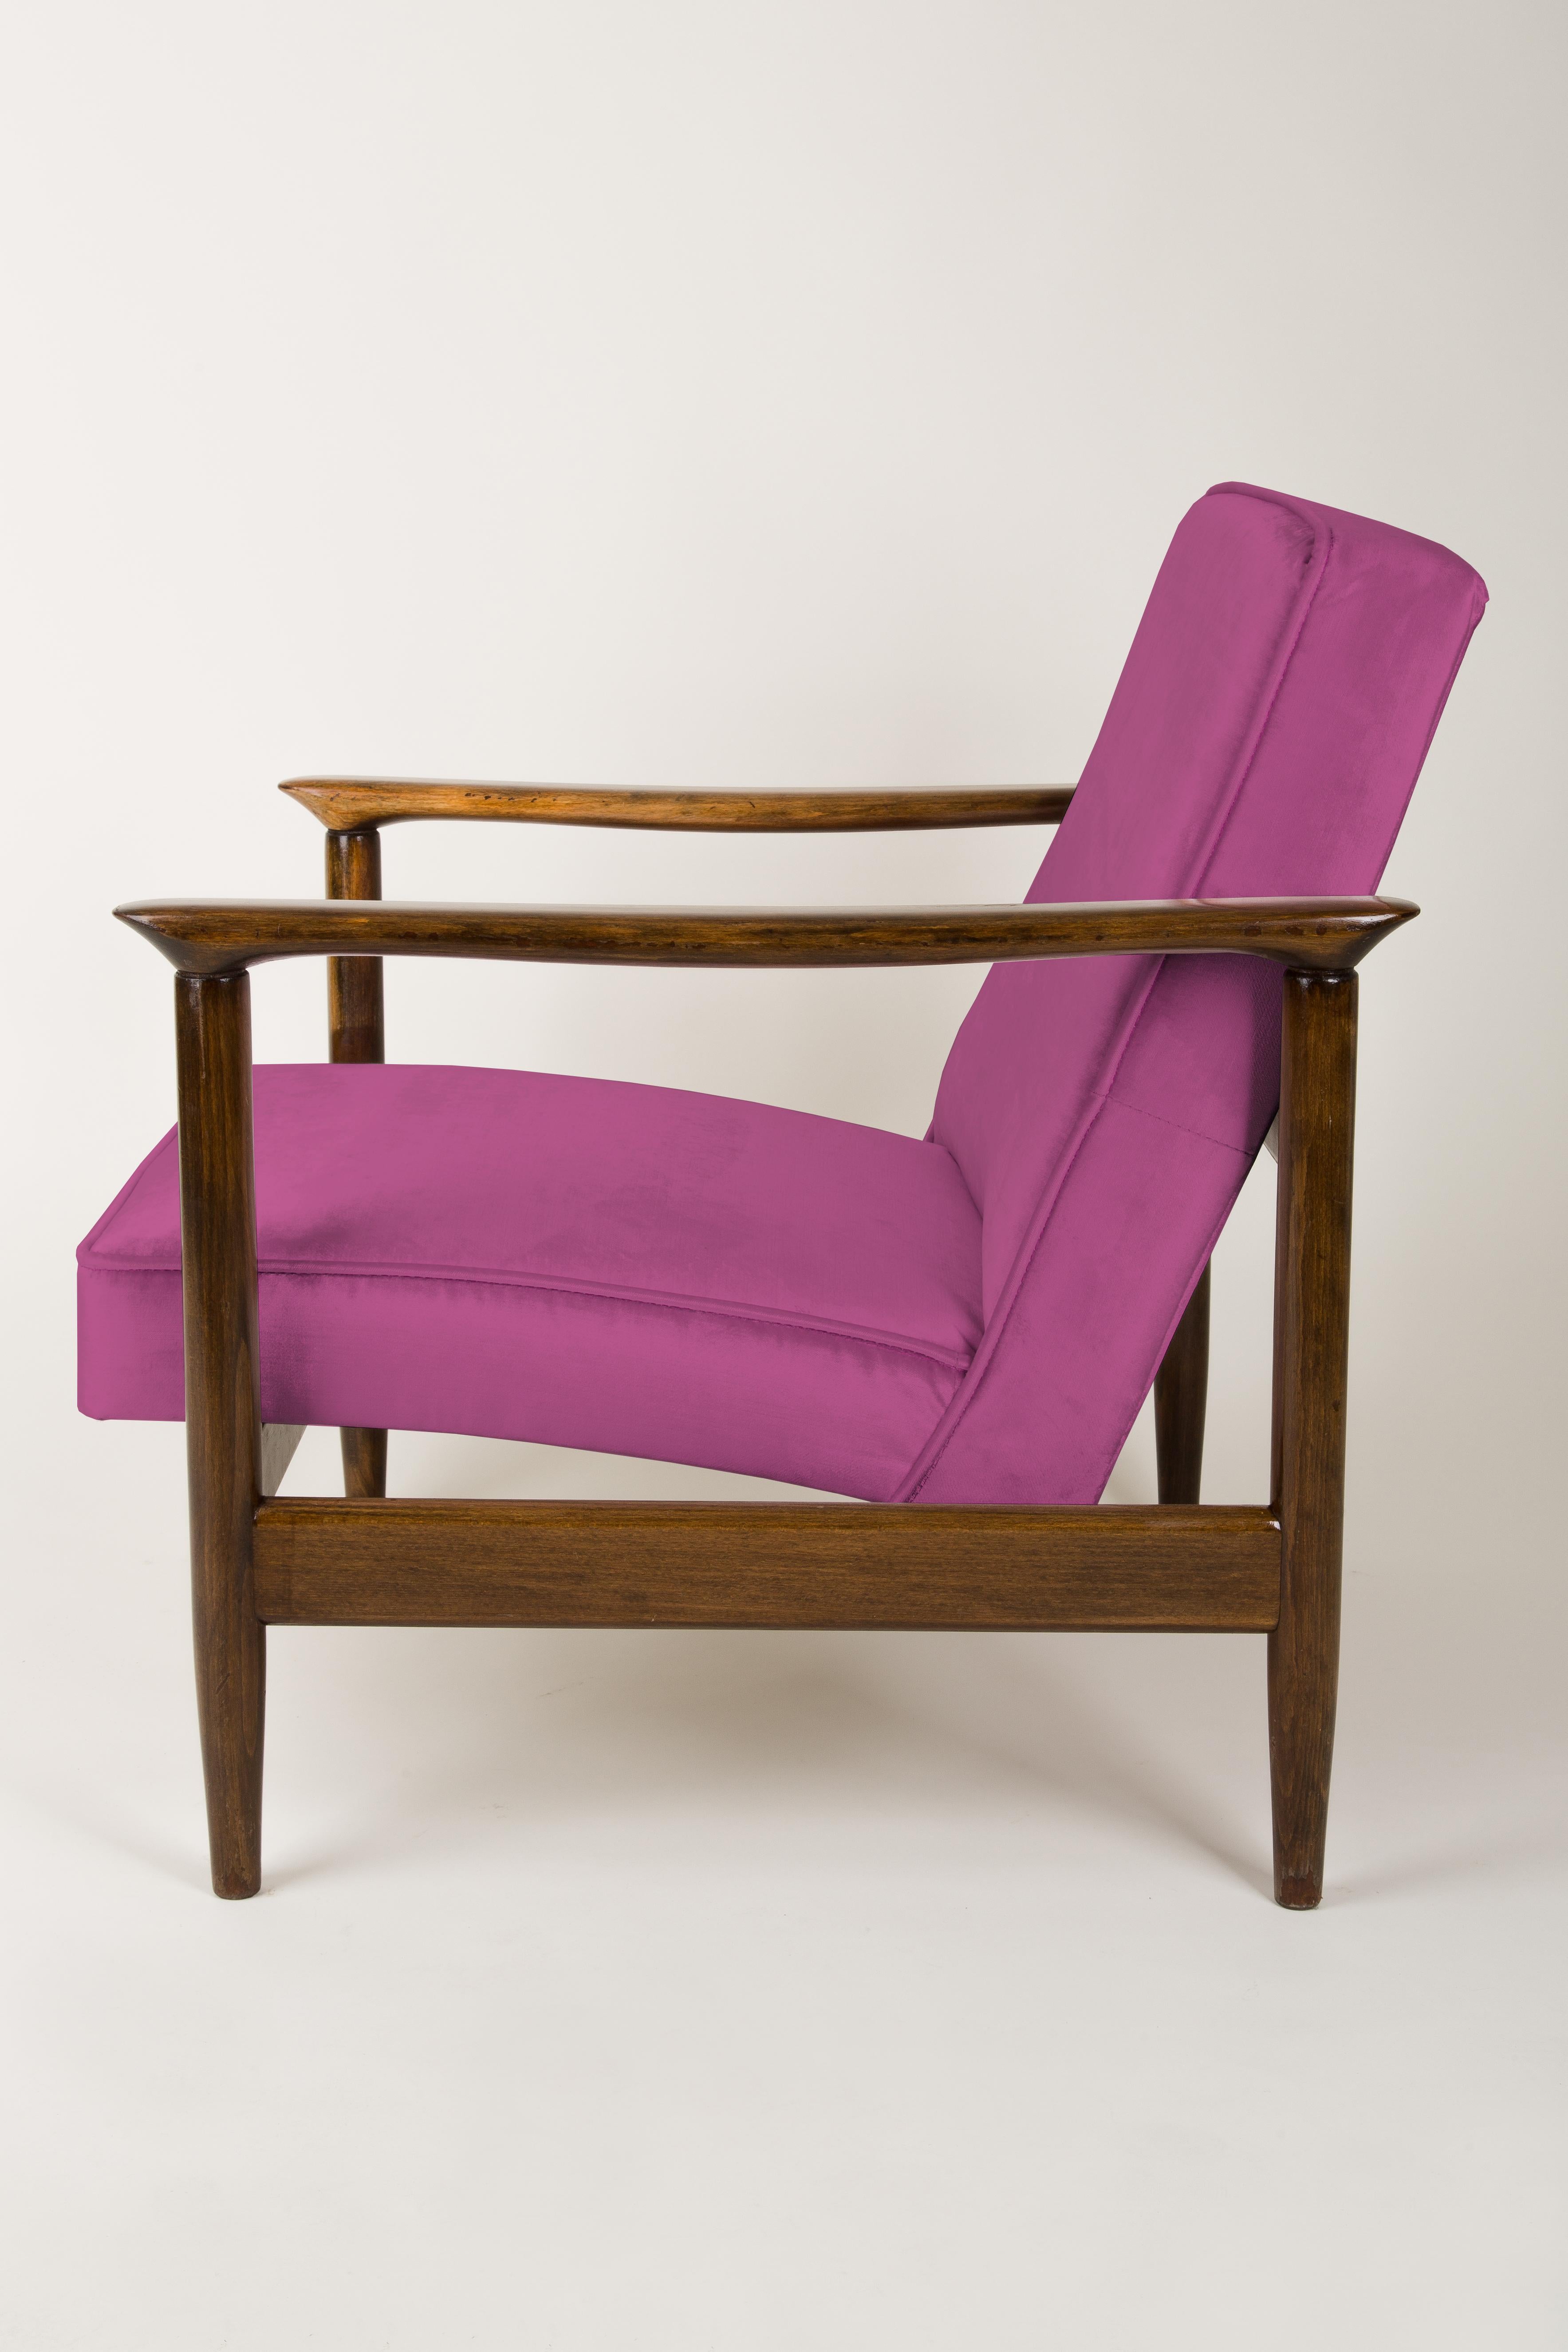 20th Century Pair of Pink Armchairs, Edmund Homa, GFM-142, 1960s, Poland For Sale